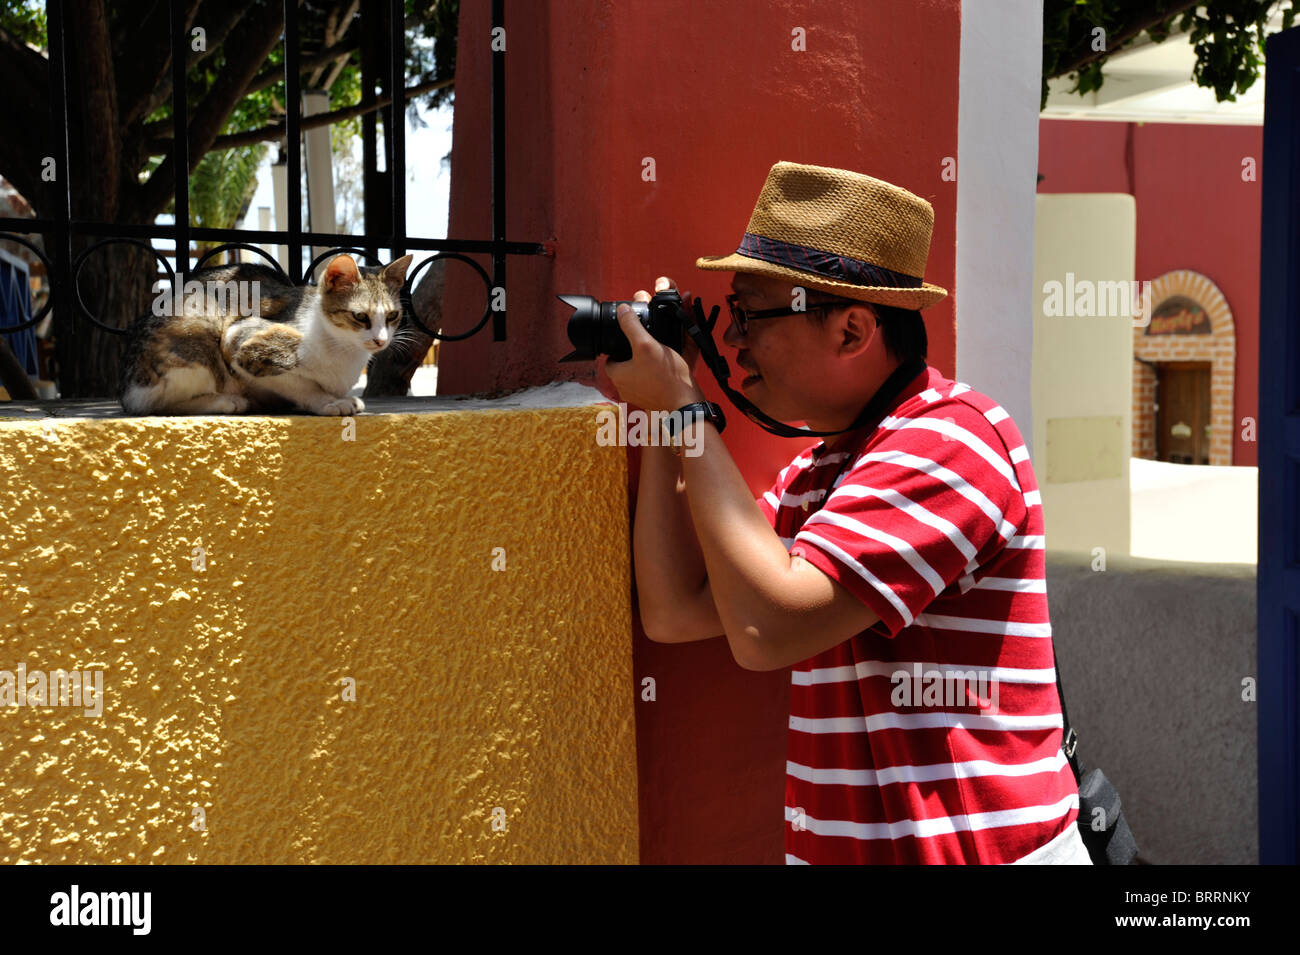 Japanese tourist photographing a cat in the capital town of Fira on the Greek island of Santorini in the Cyclades Stock Photo